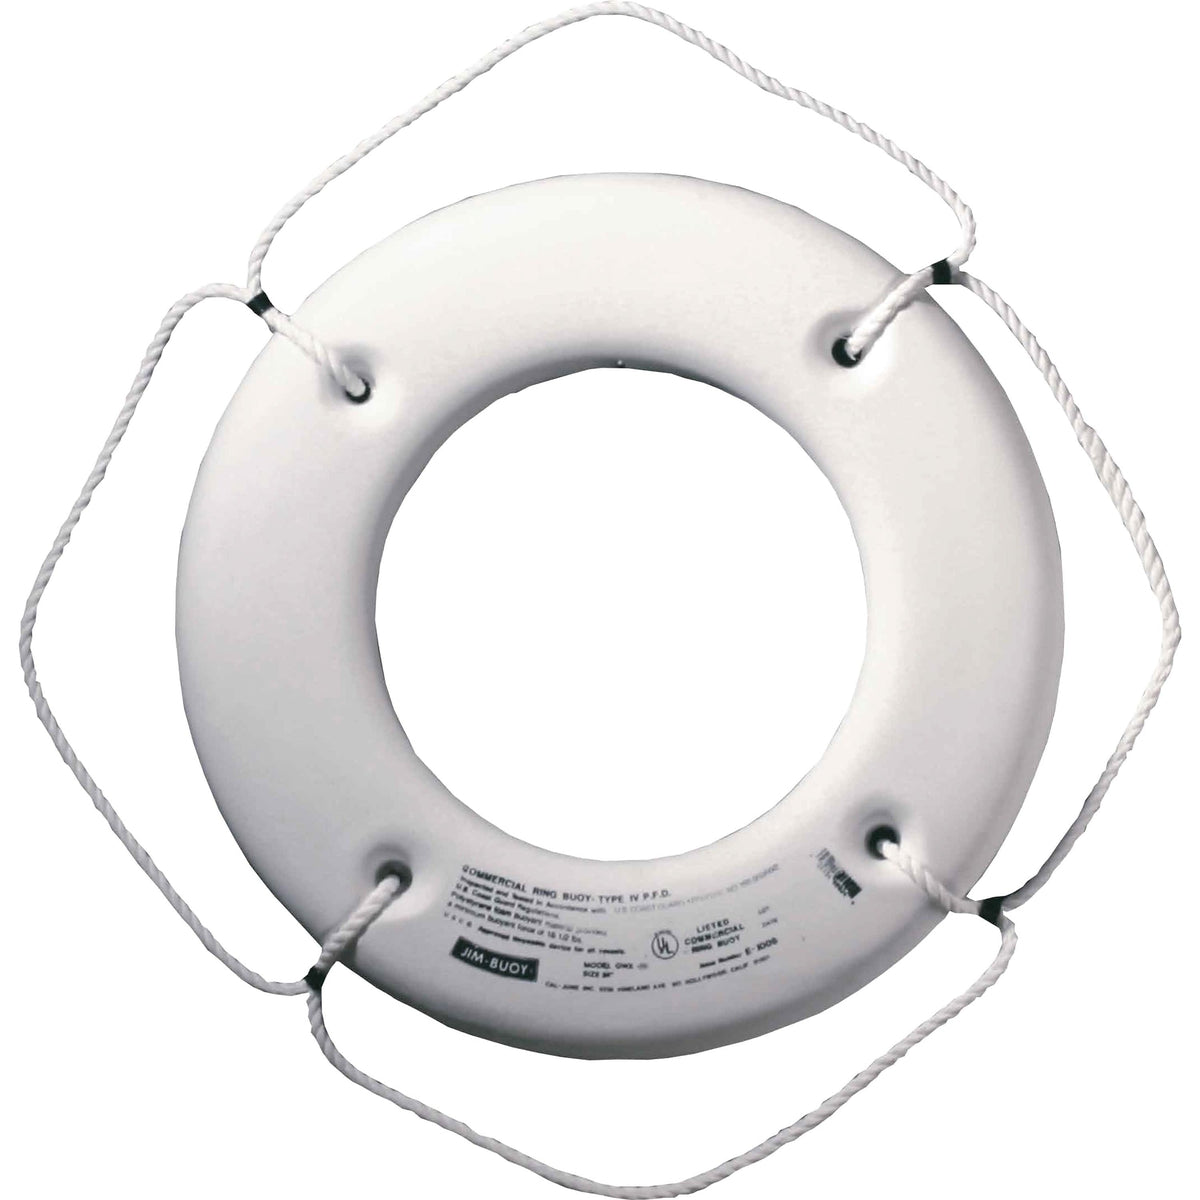 Cal-June USCG Approved Hard Shell Series Life Ring 24" White #HS-24 W